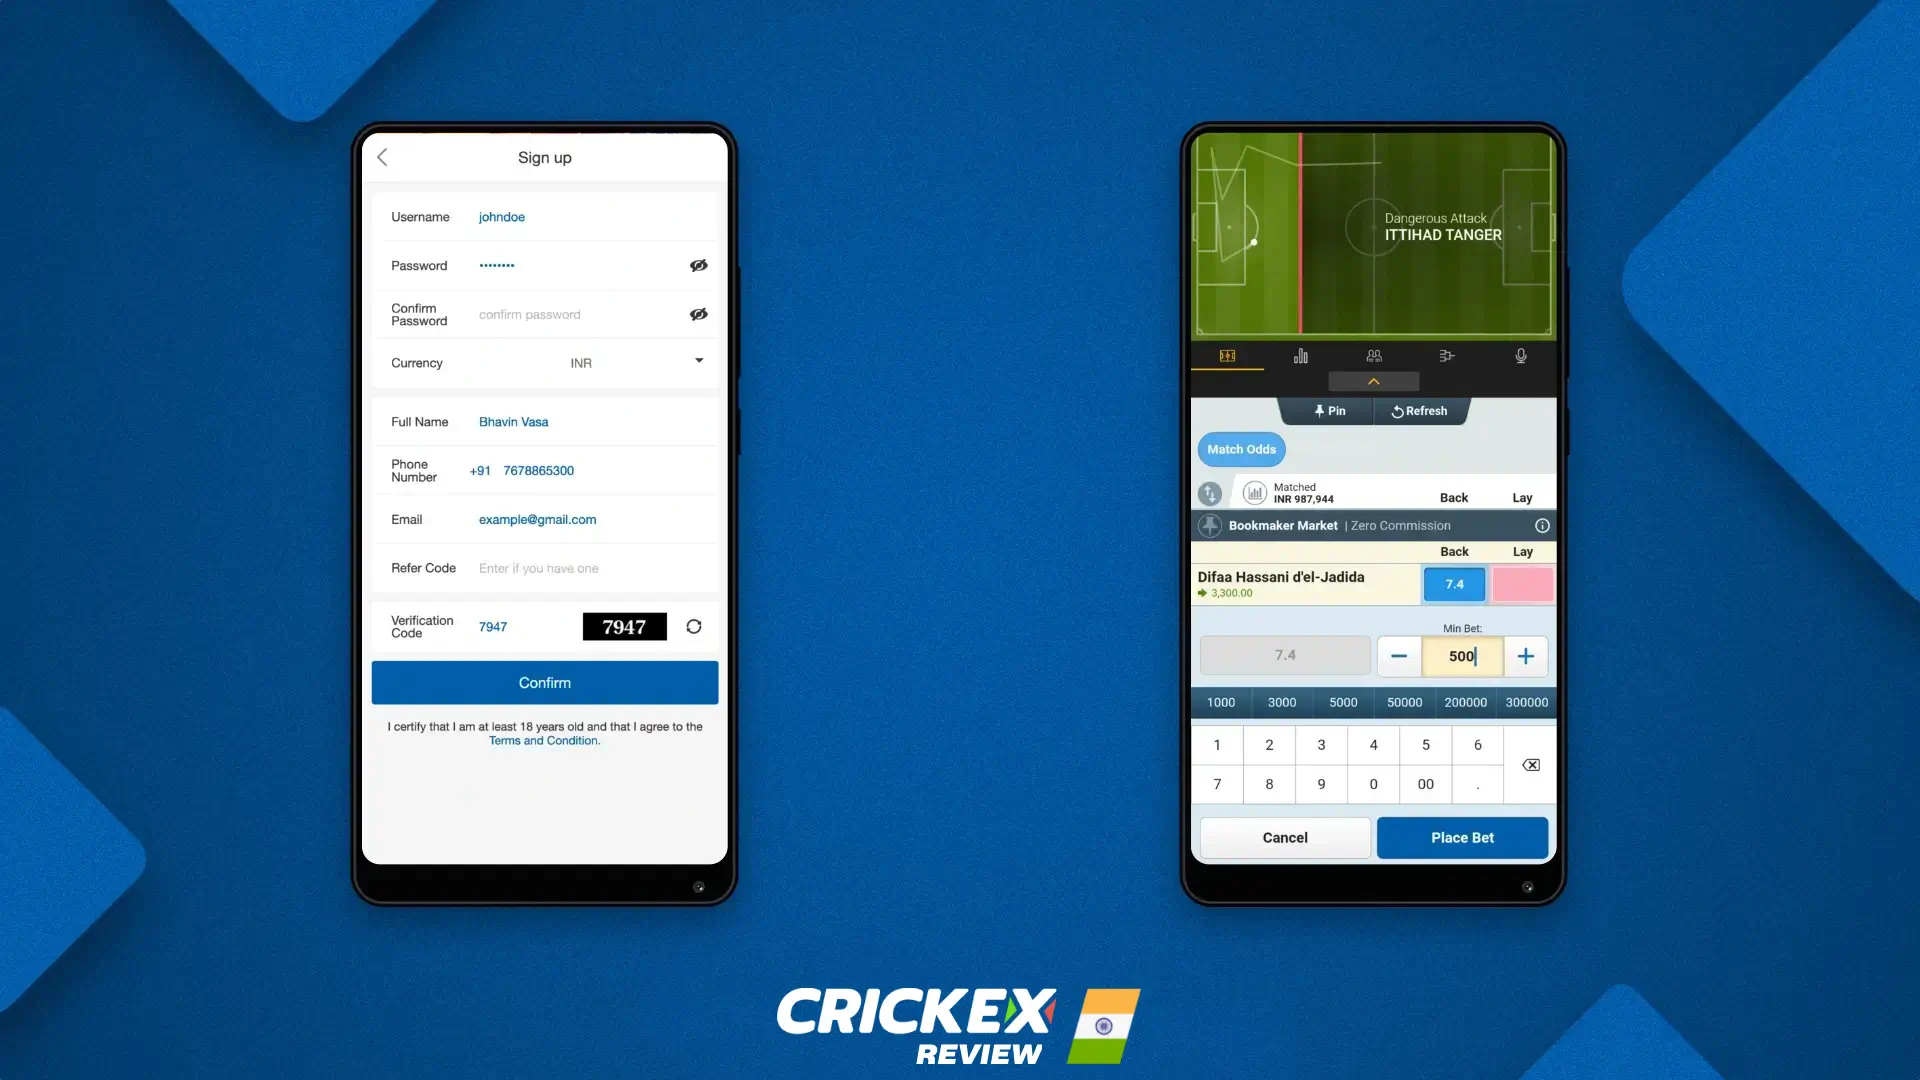 How to make the first bet in the Crickex app